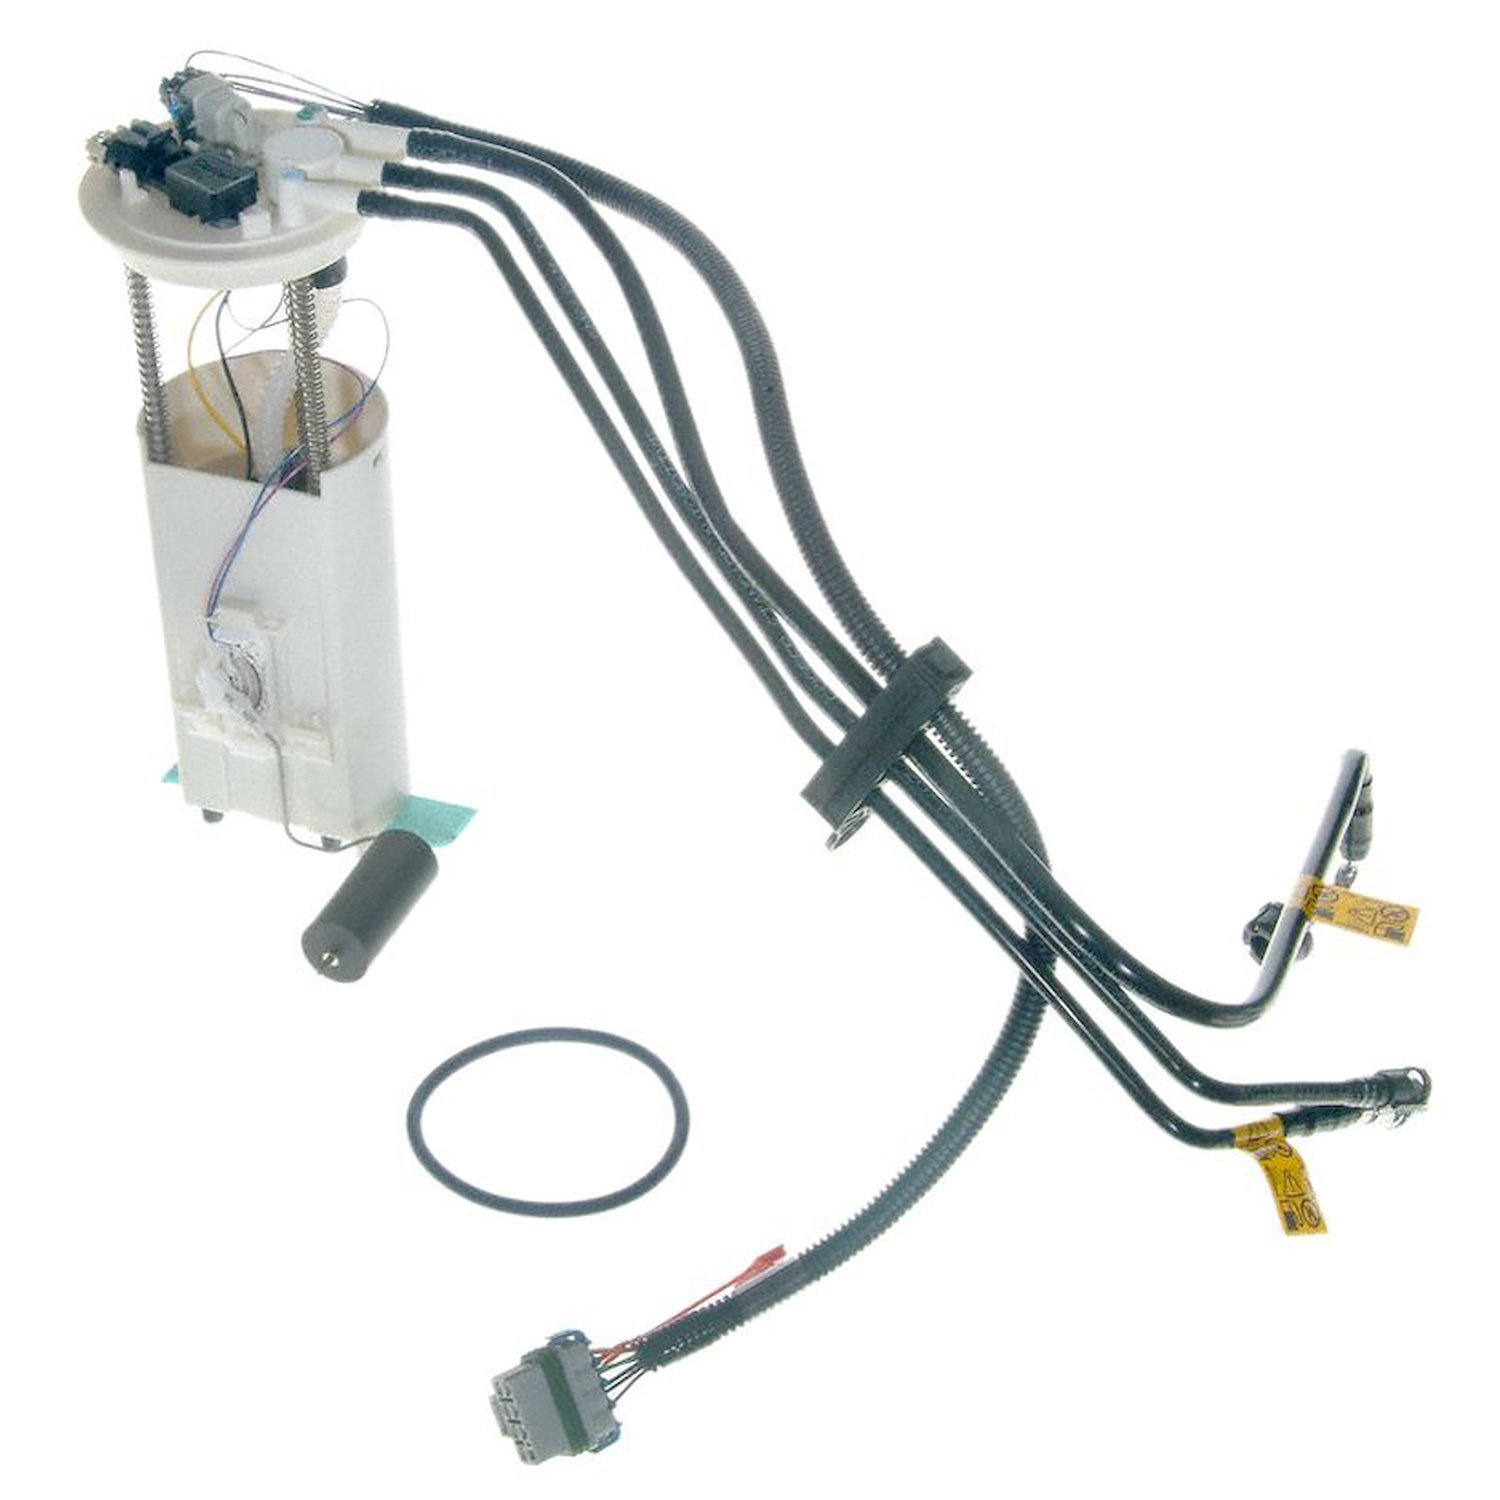 OE GM Replacement Electric Fuel Pump Module Assembly for 1996-1998 Buick/Chevy/Oldsmobile/Pontiac